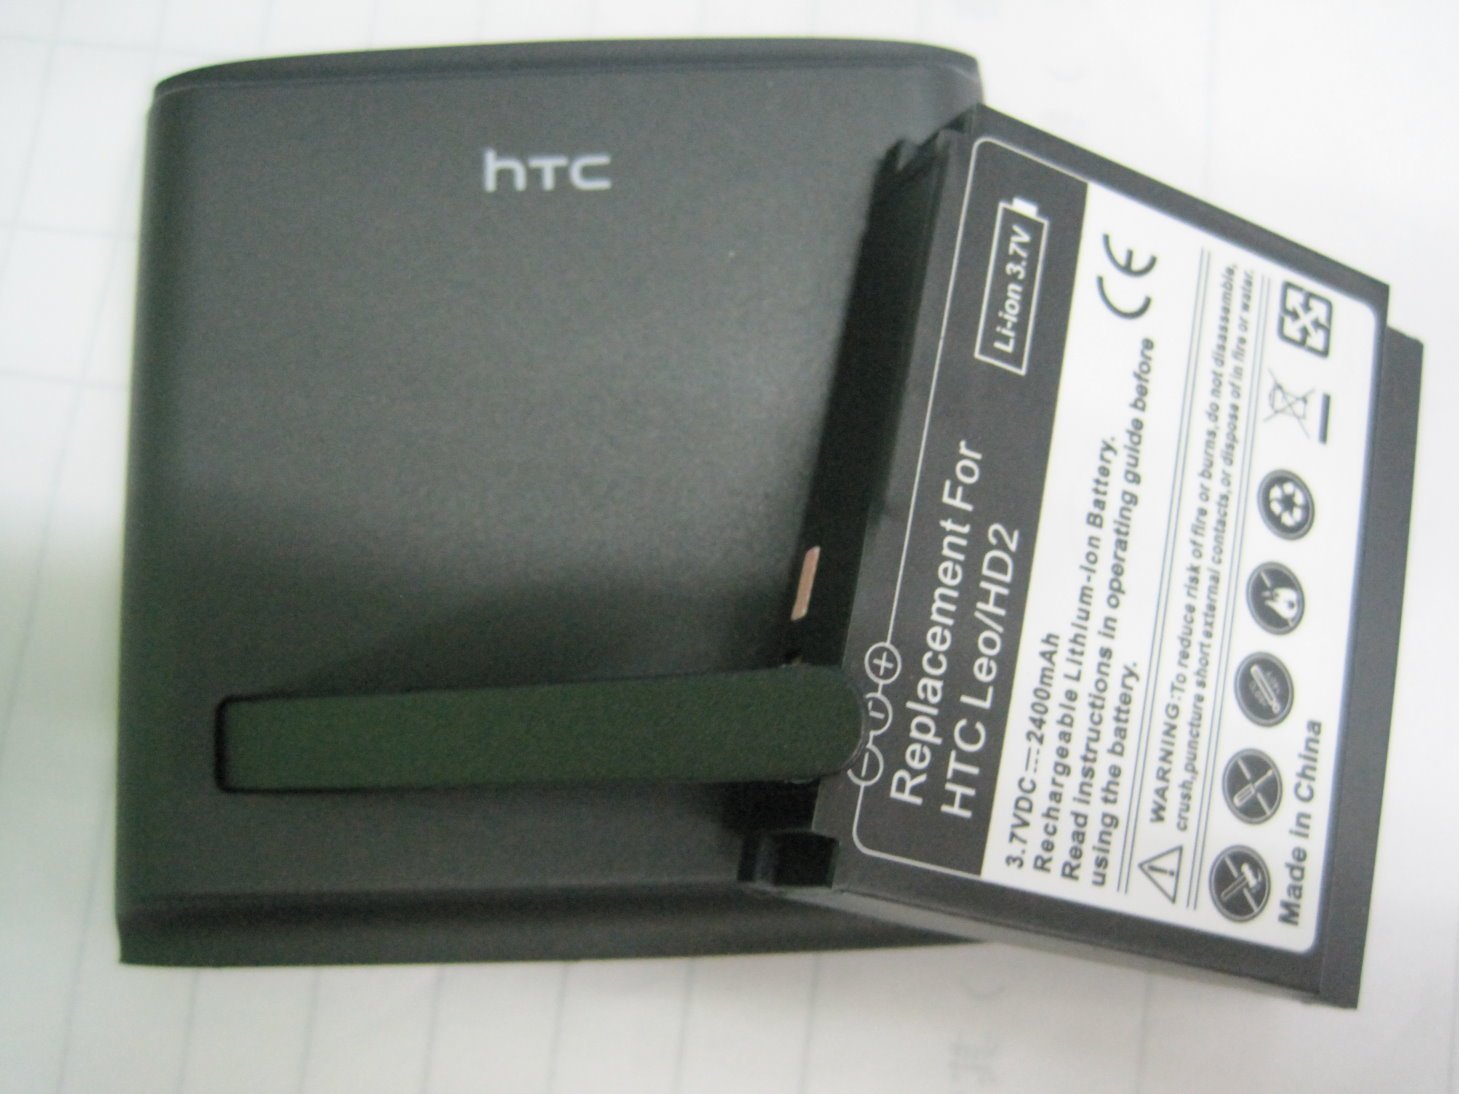 Htc hd2 battery replacement